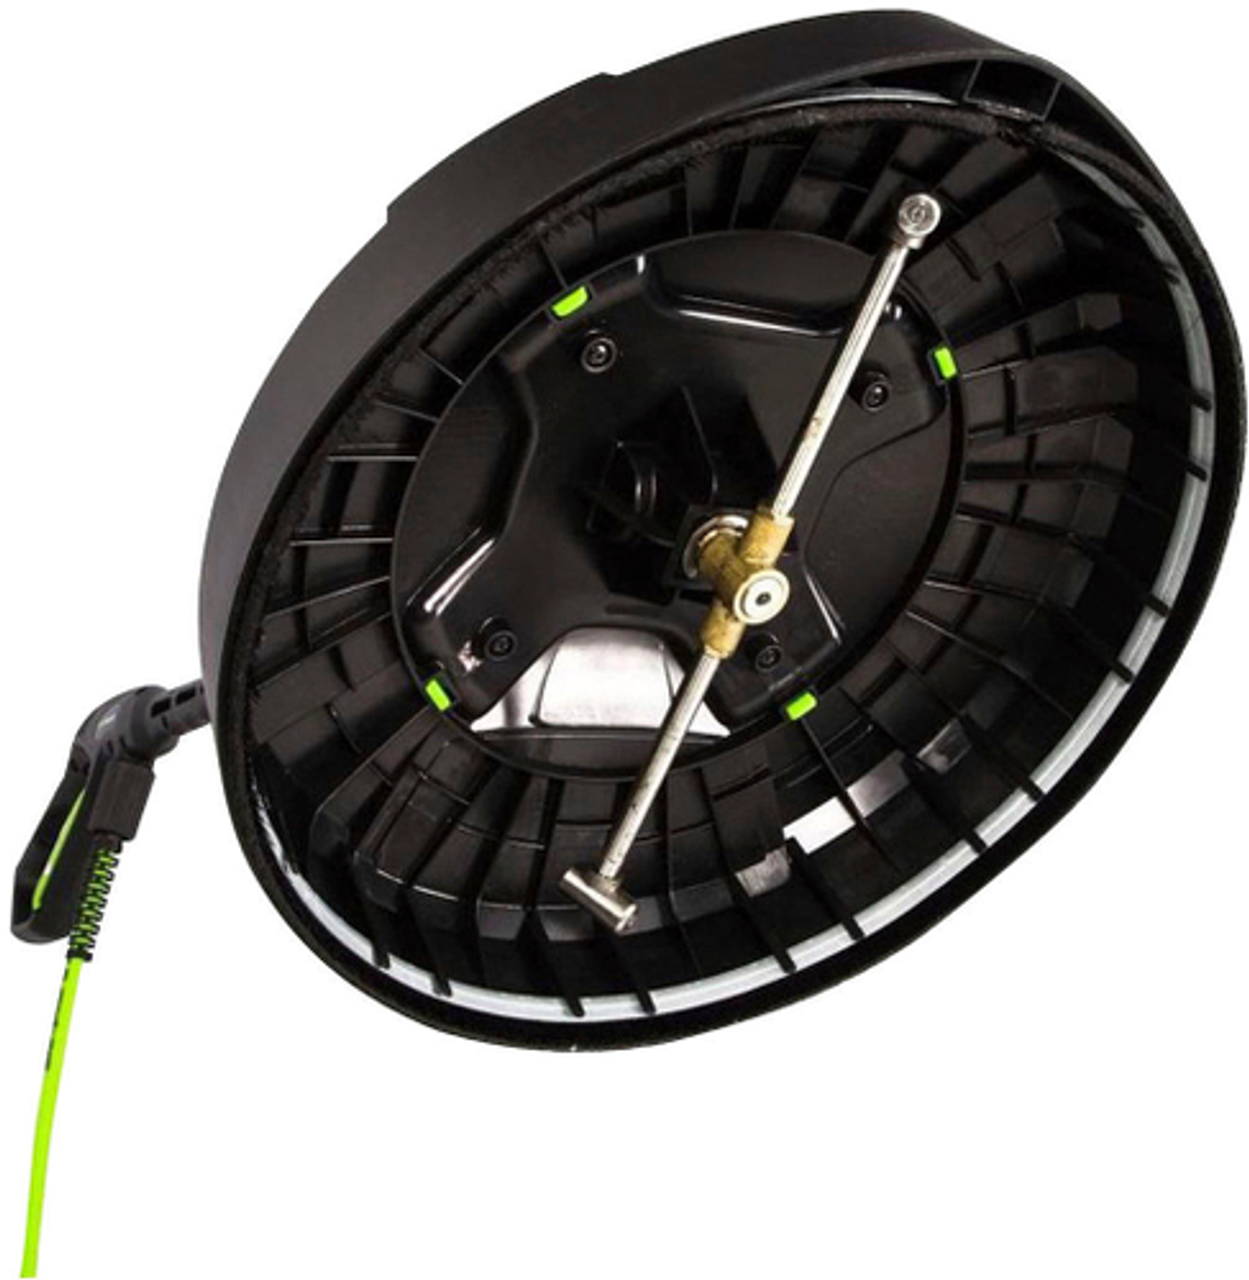 Greenworks - 15" Pro Surface Cleaner  (3100 PSI MAX)